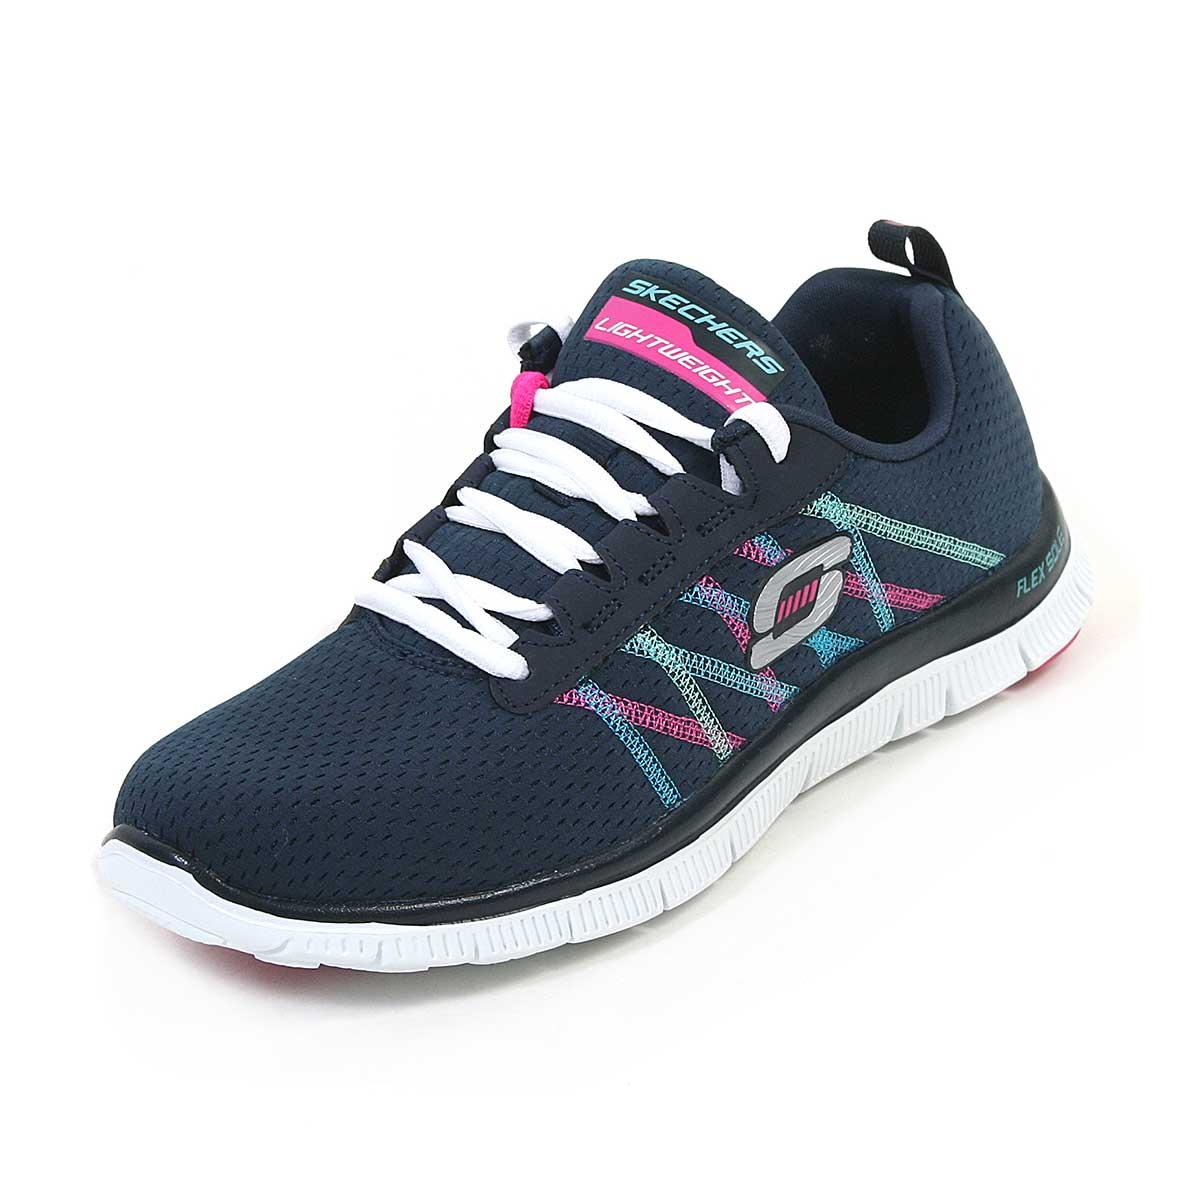 Buy Flex Appeal Womens Running Shoes (Navy / Online